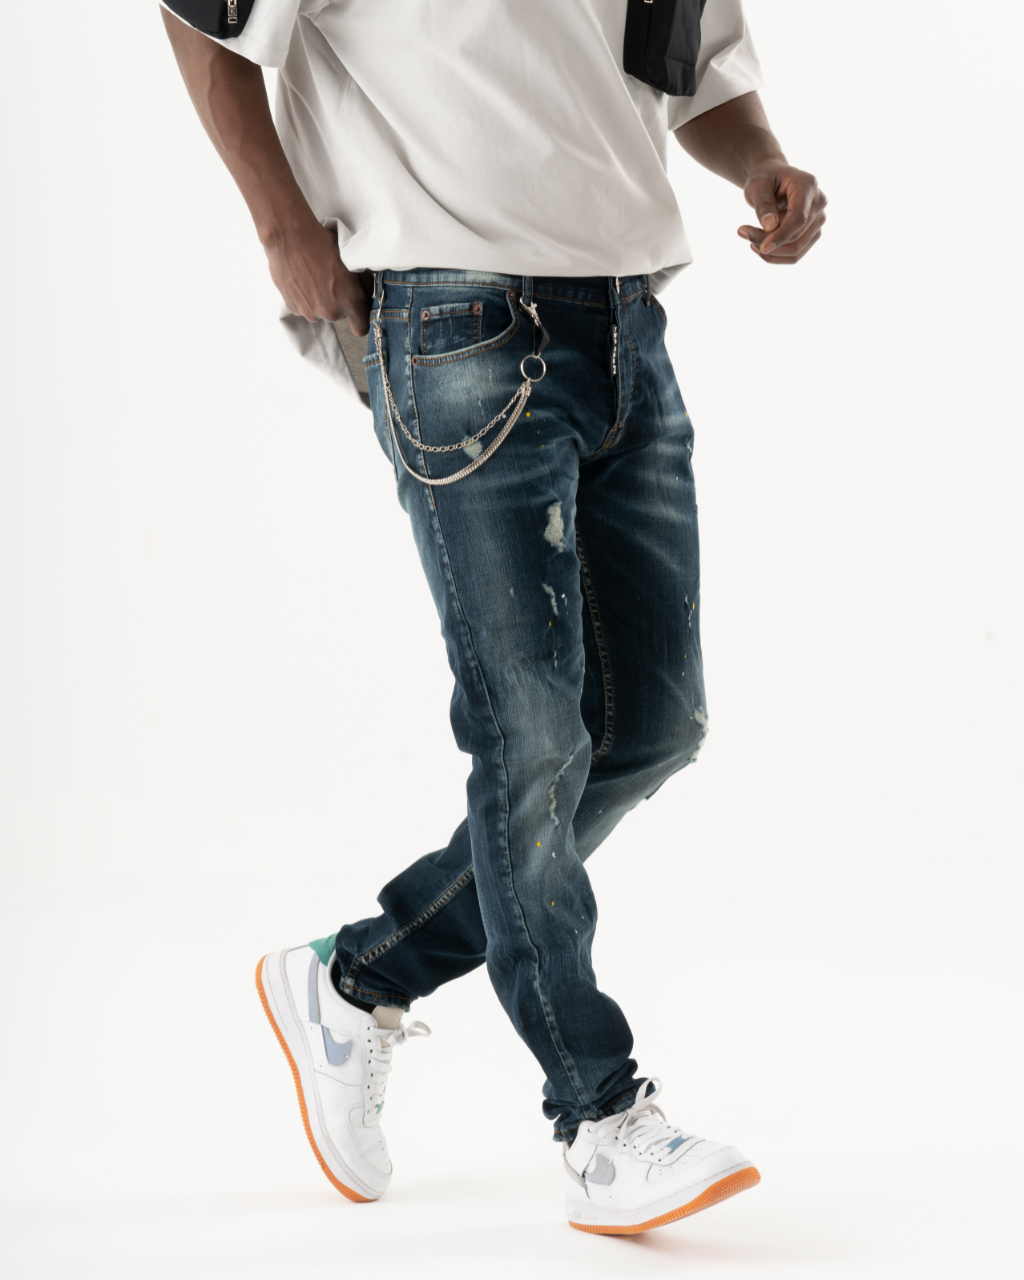 A man in KUDOS blue jeans and white sneakers is walking in front of a white background.